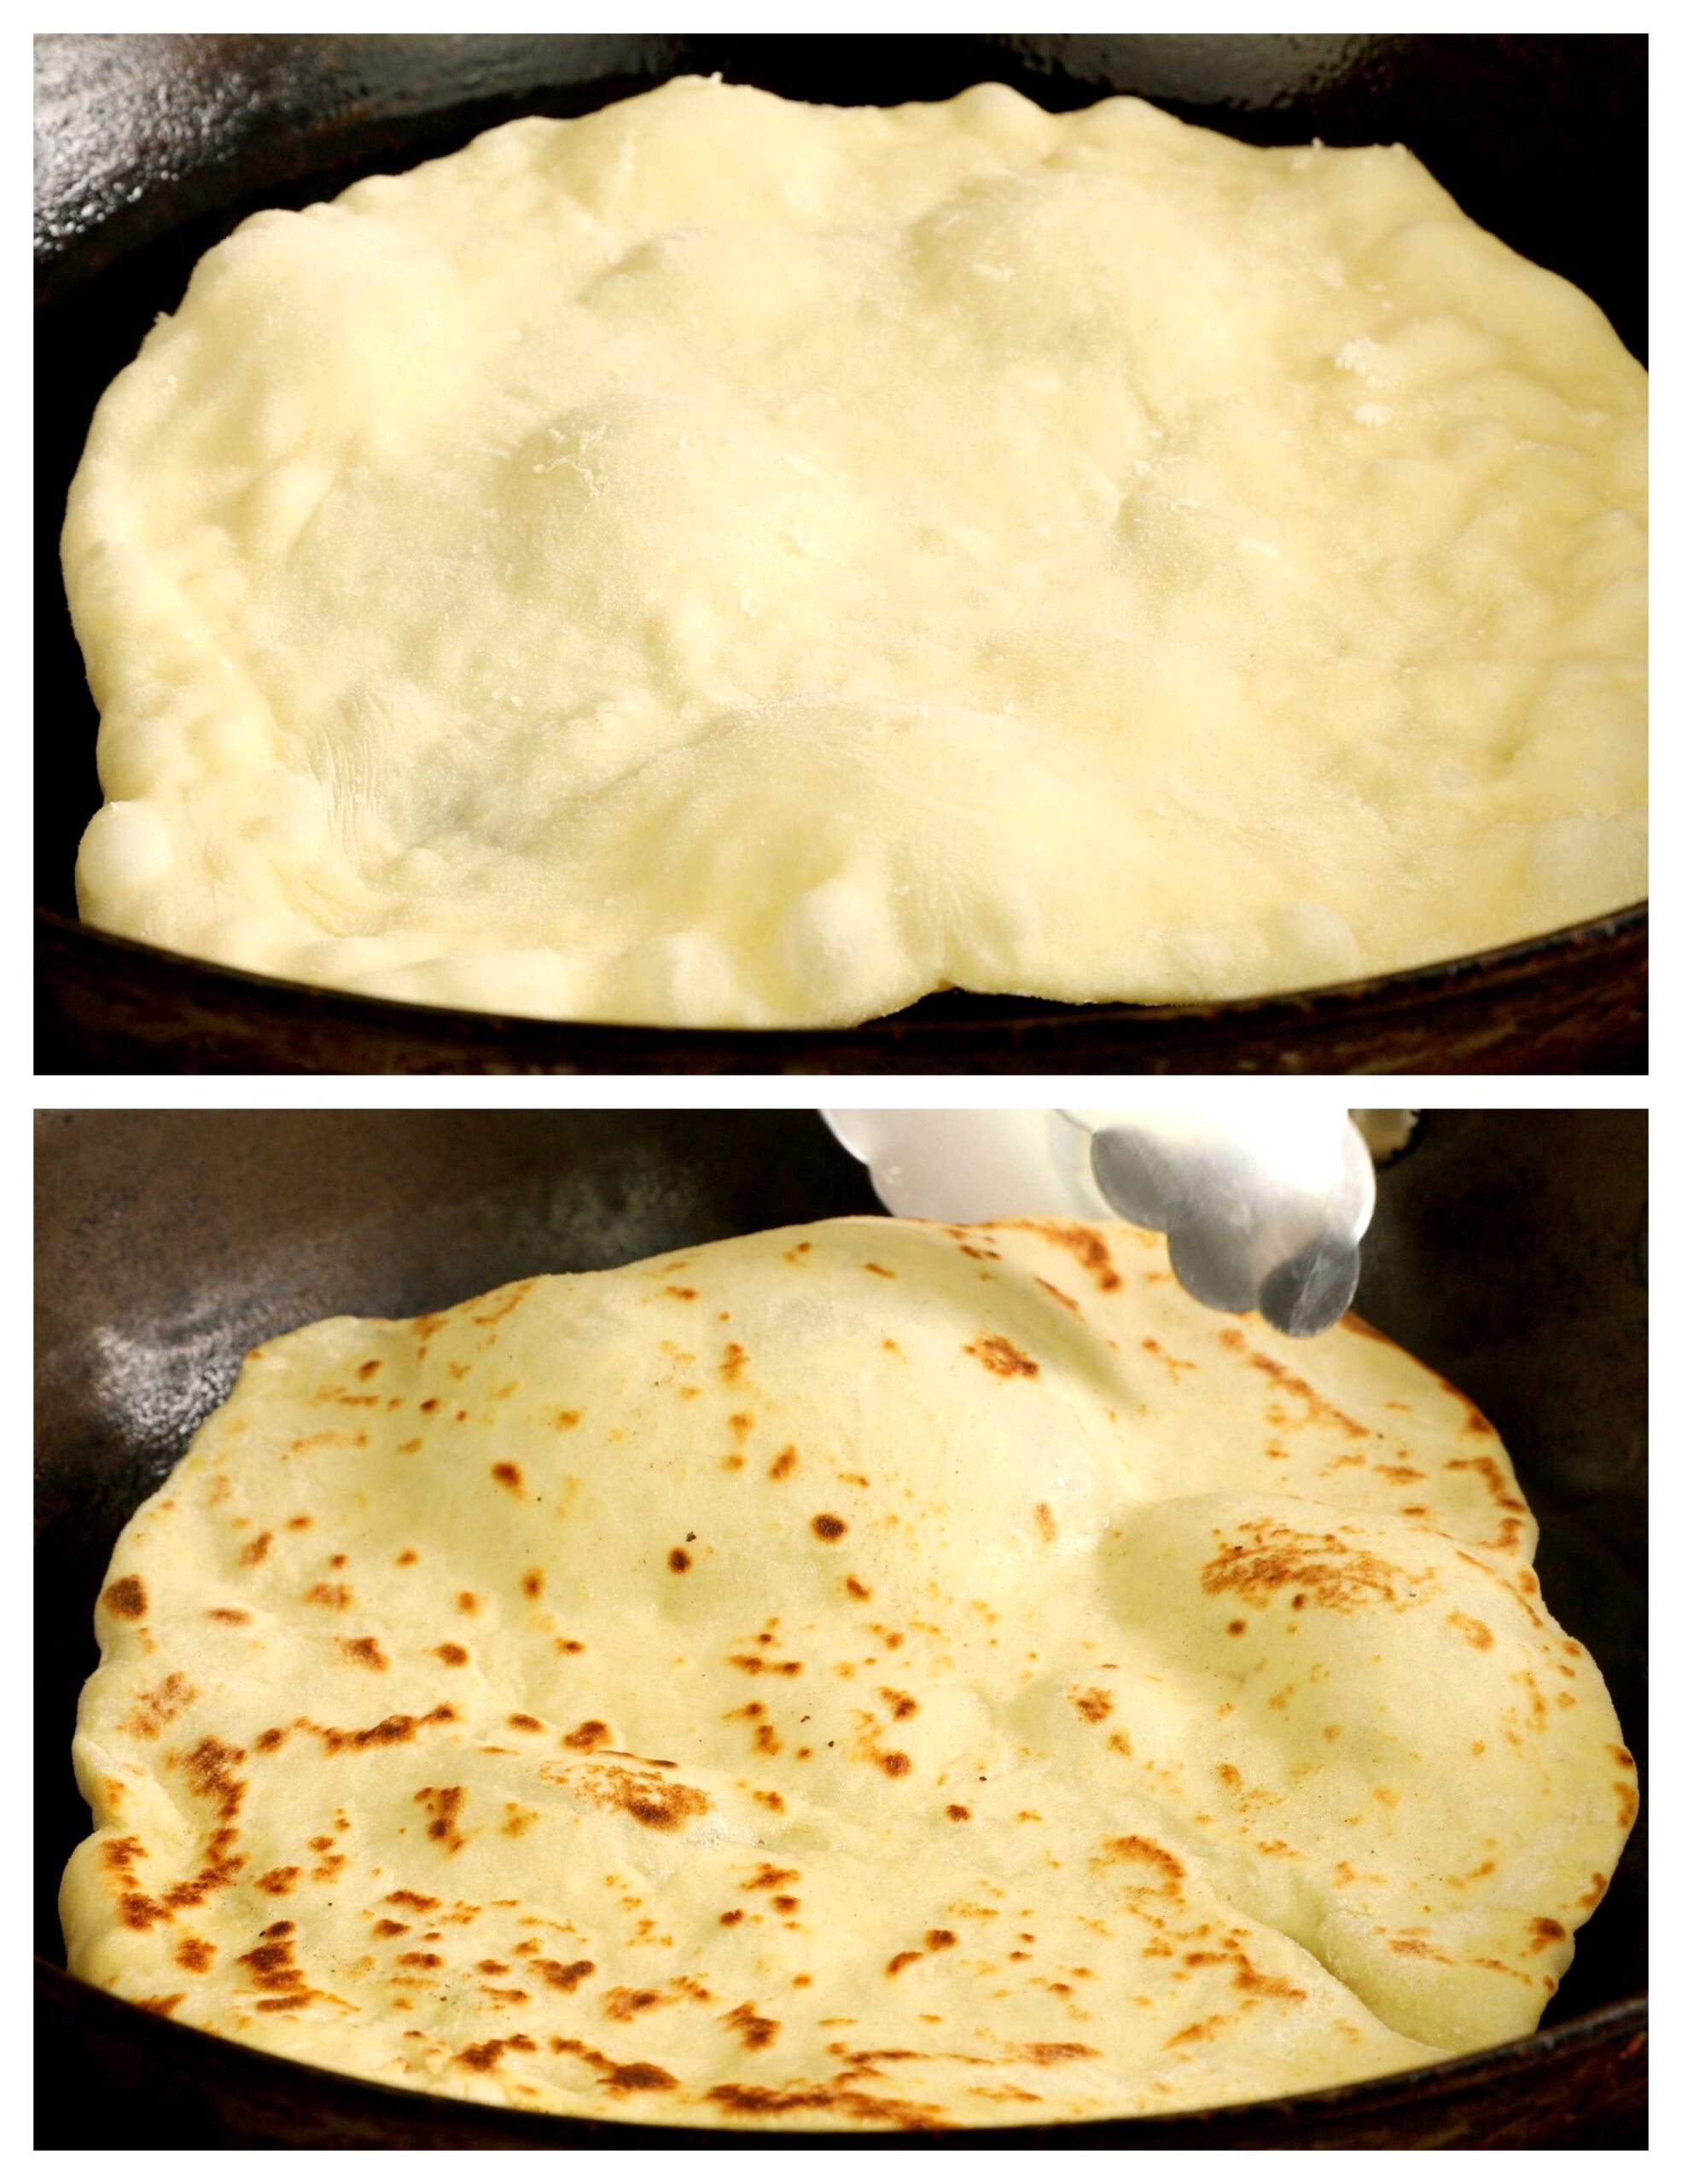 Pita bread cooking process images